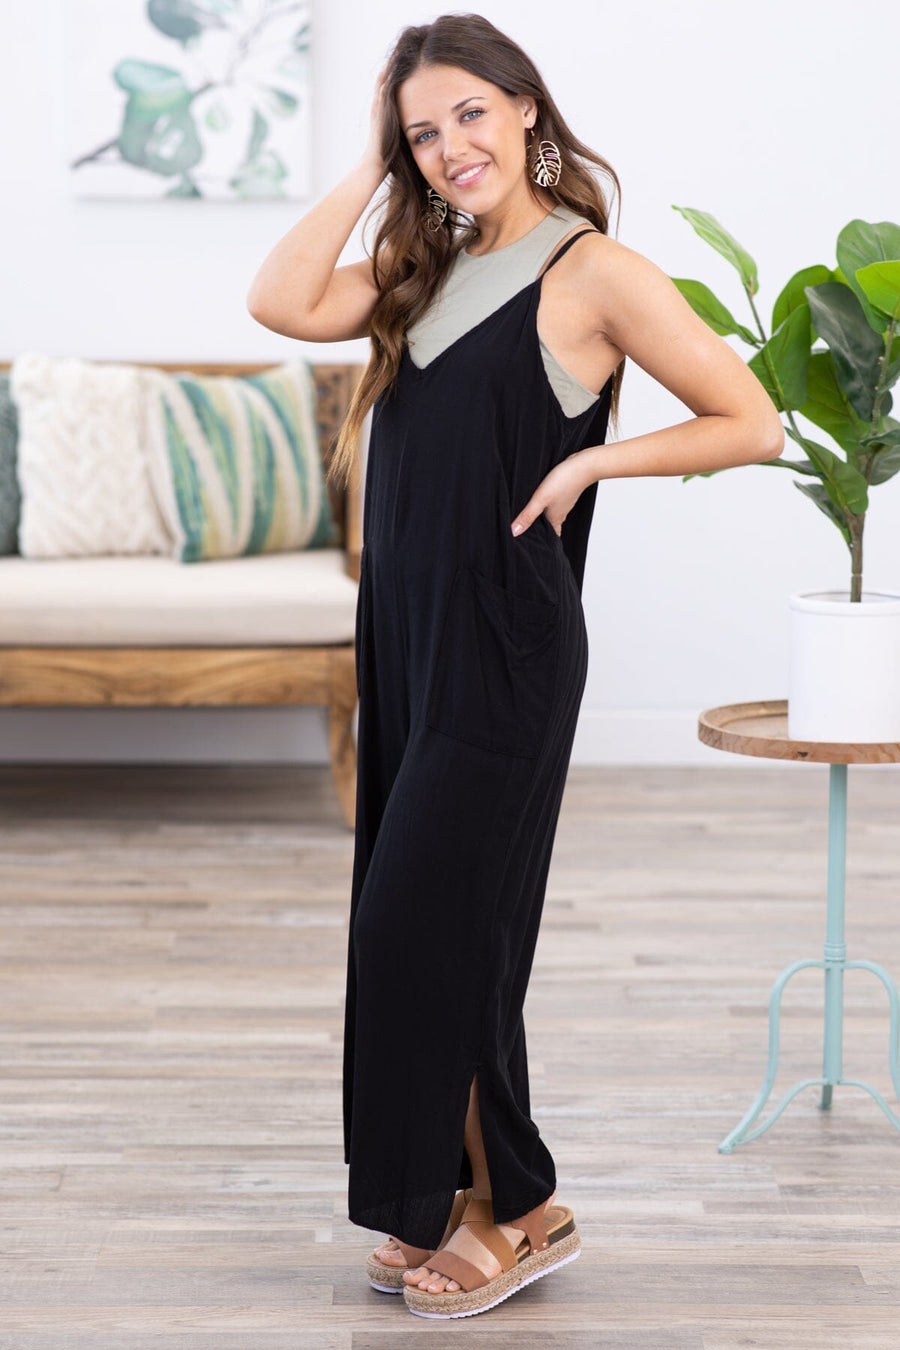 Black Wide Leg Jumpsuit With Pockets - Filly Flair